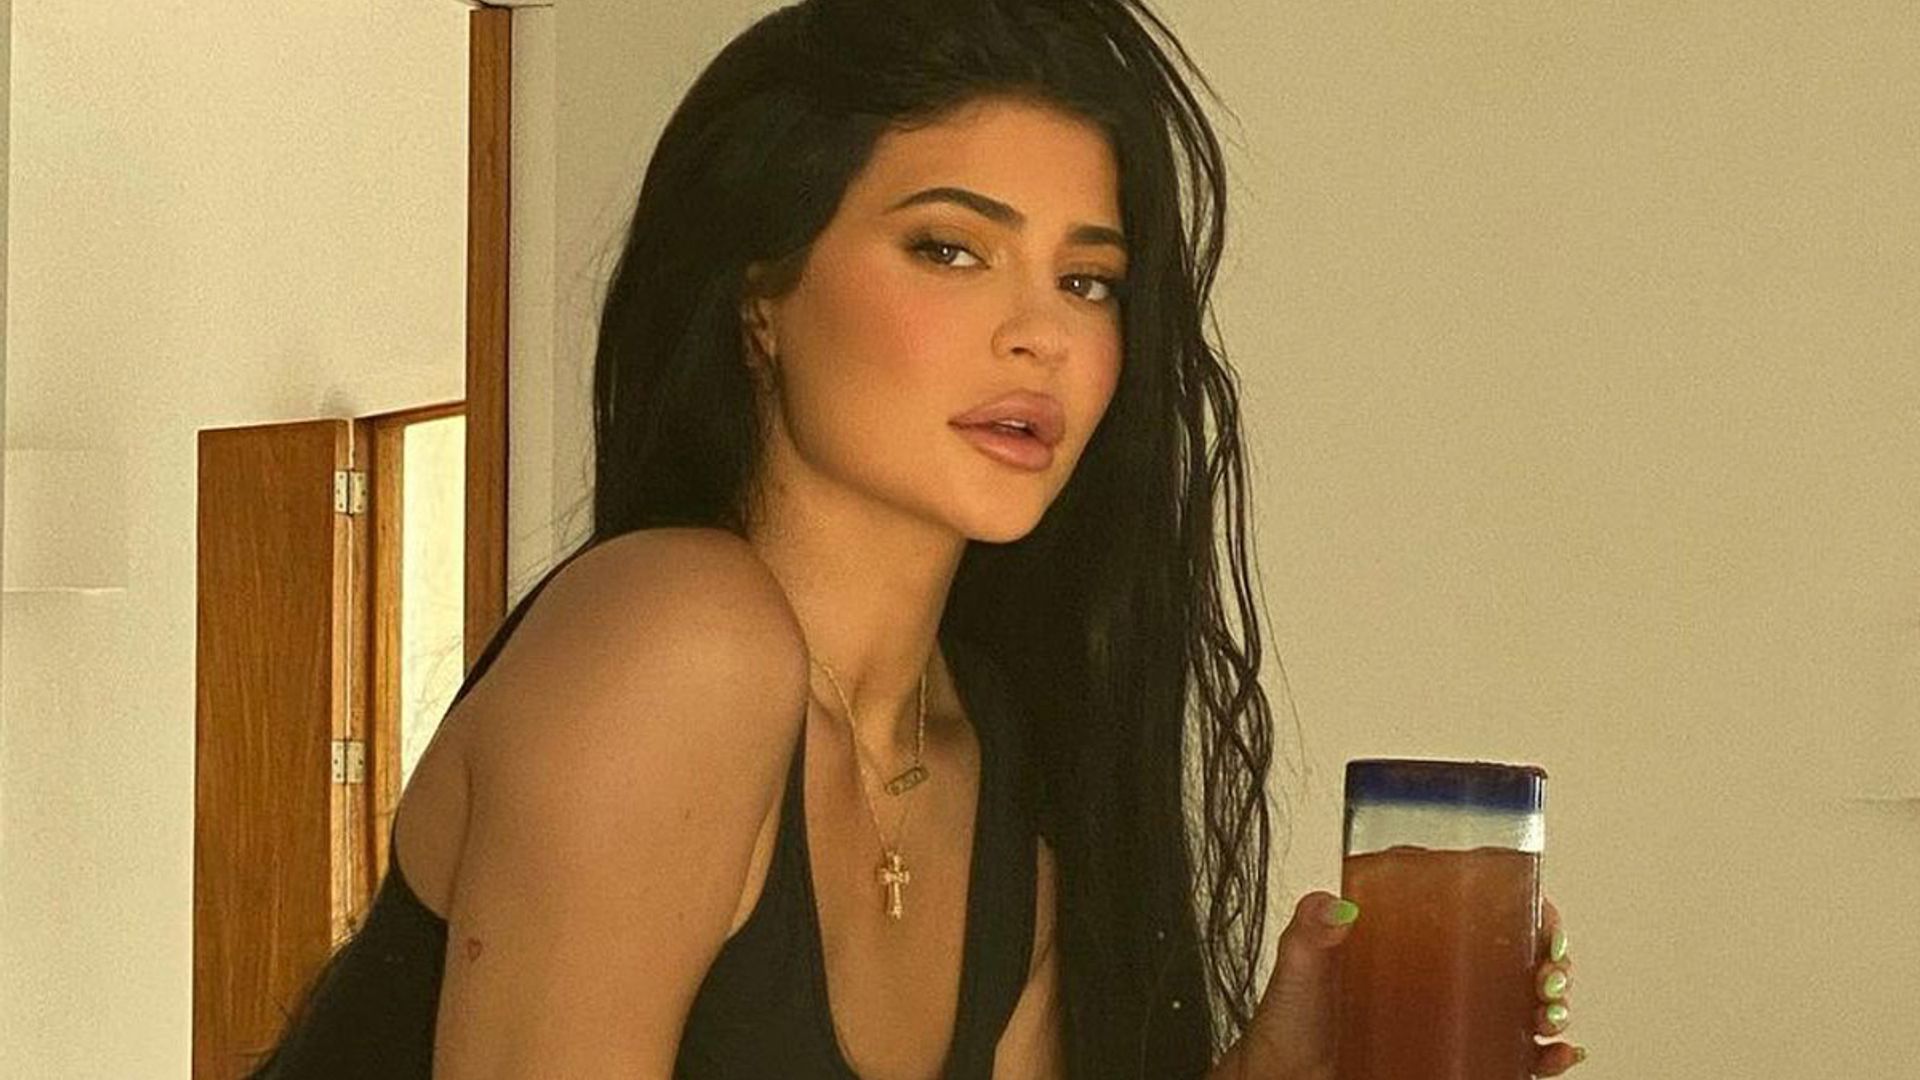 Kylie Jenner's unusual holiday drink has fans asking questions